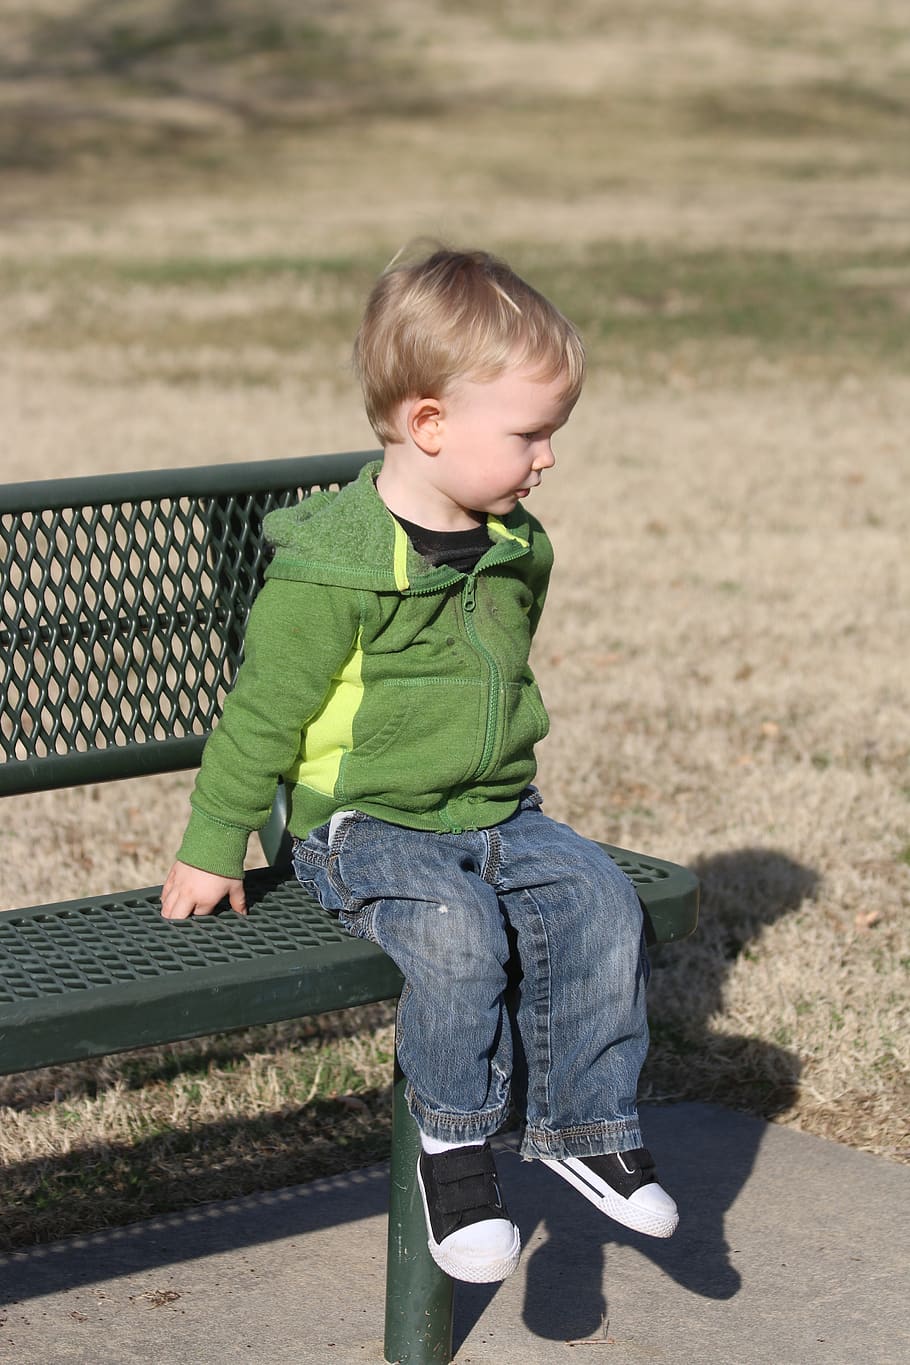 stoic, kid, bench, toddler, alone, childhood, full length, one person, HD wallpaper